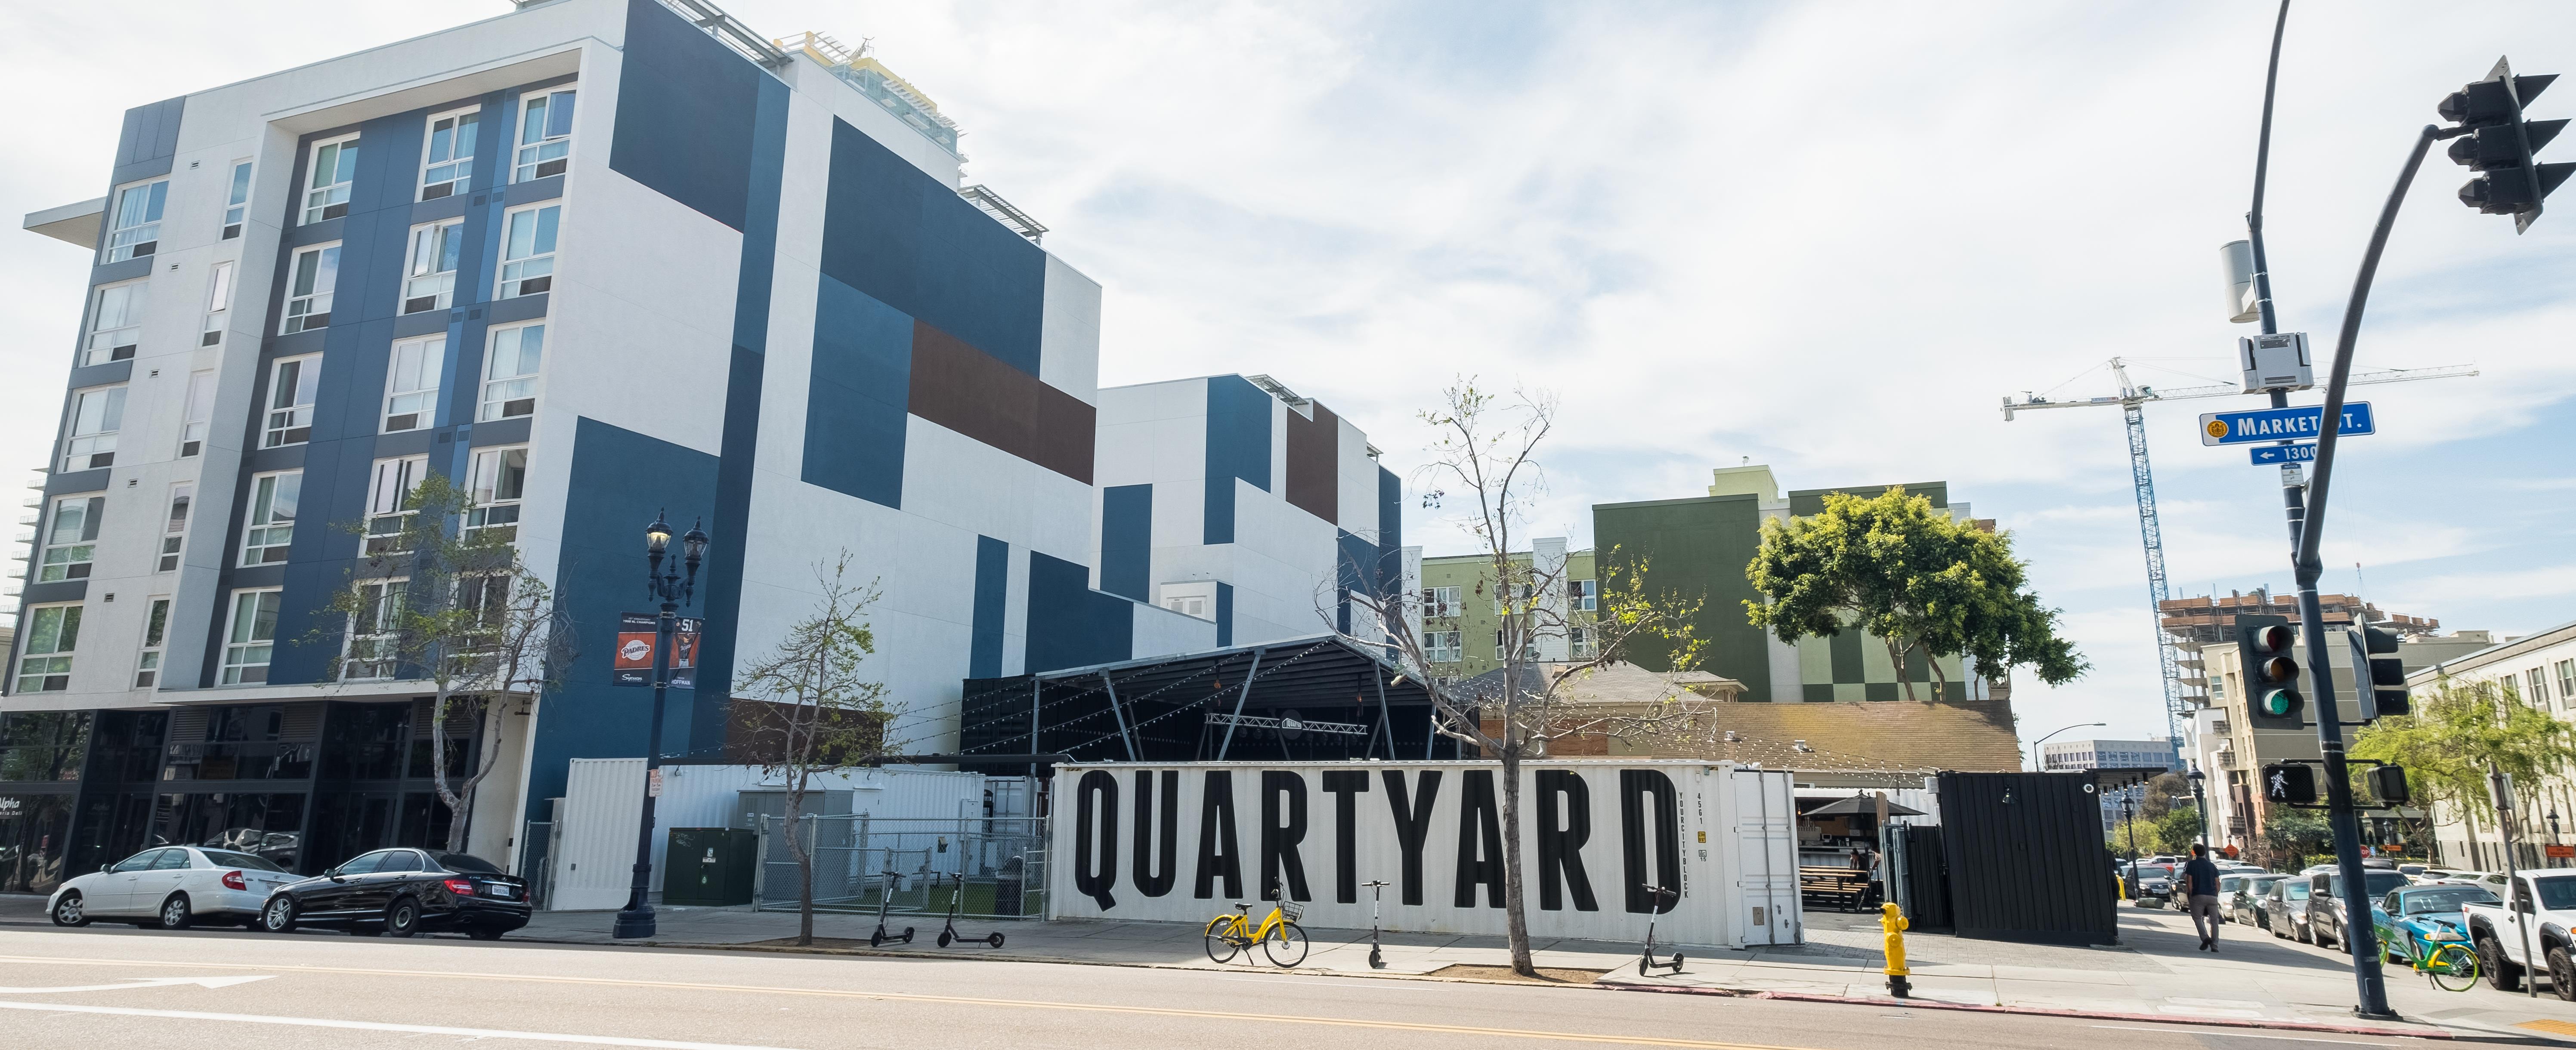 Quartyard The Official Travel Resource for the San Diego Region